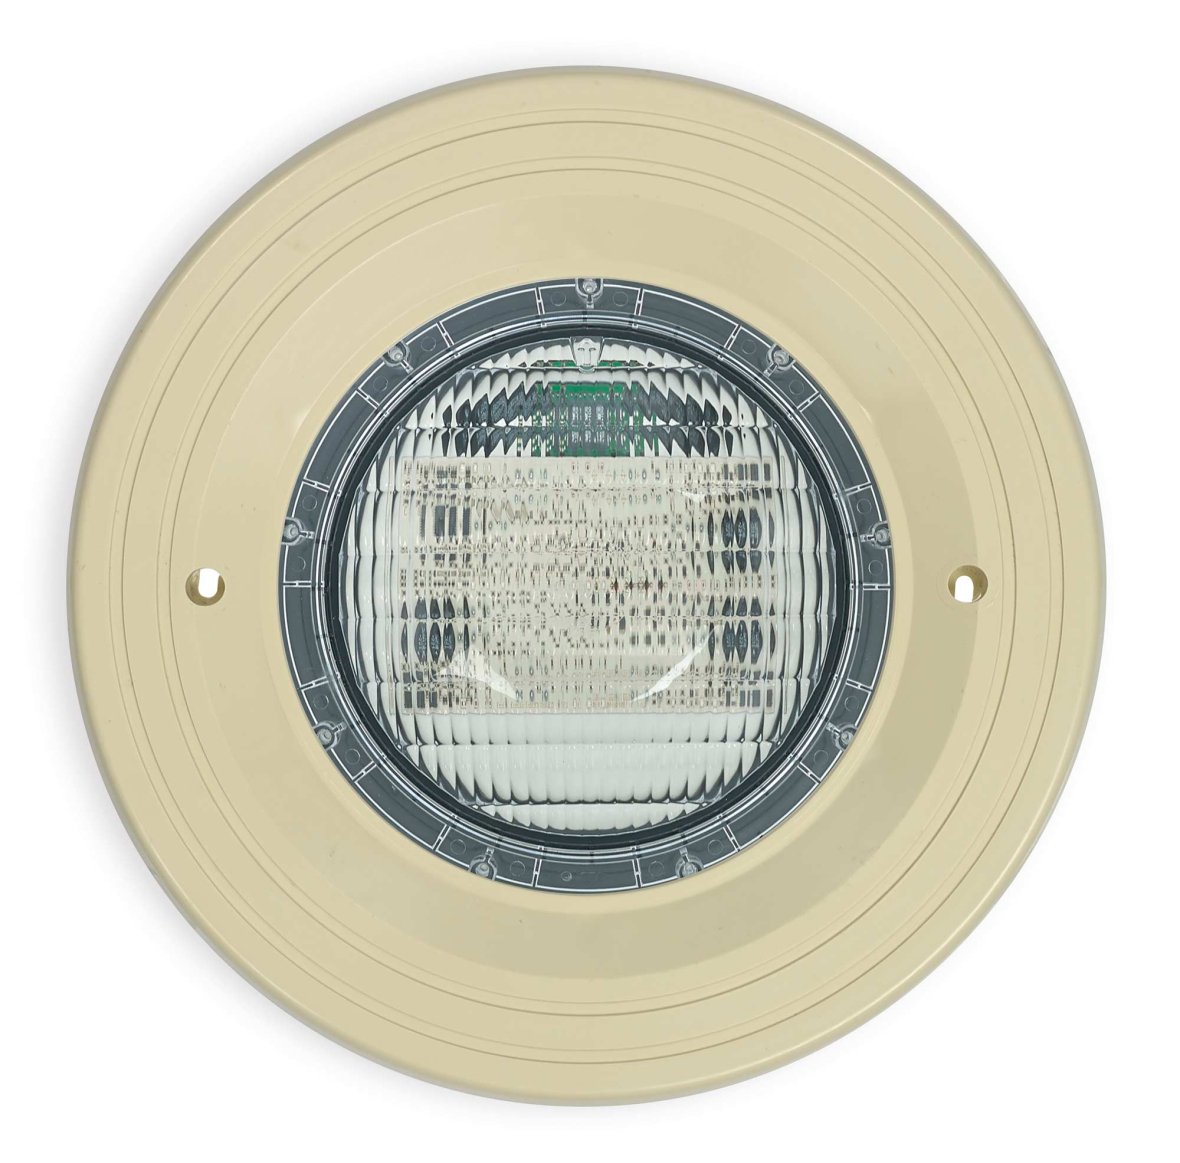 LED lamp with a beige fixture